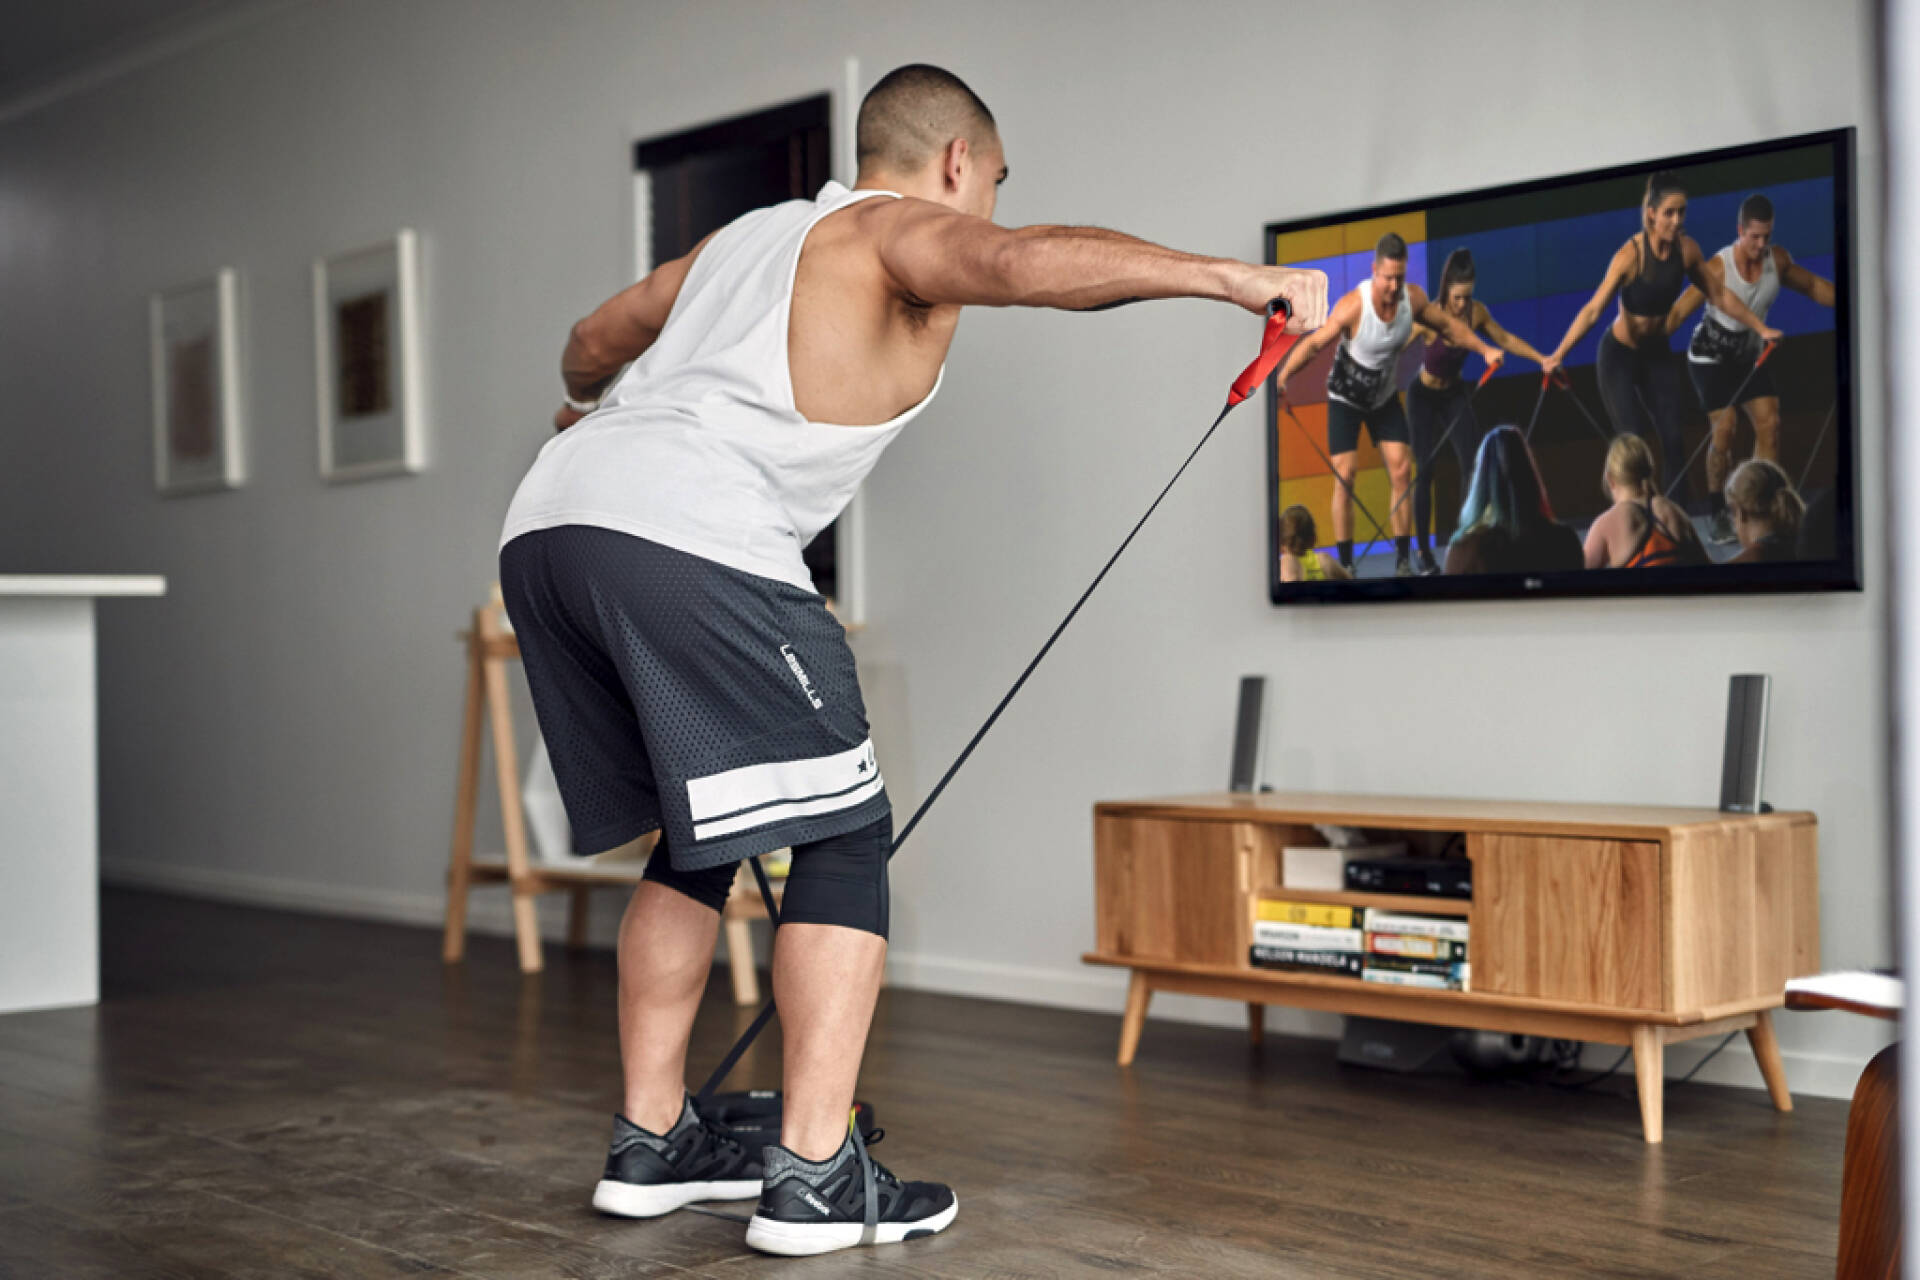 Man watching a workout video at home, following the movements with resistance bands